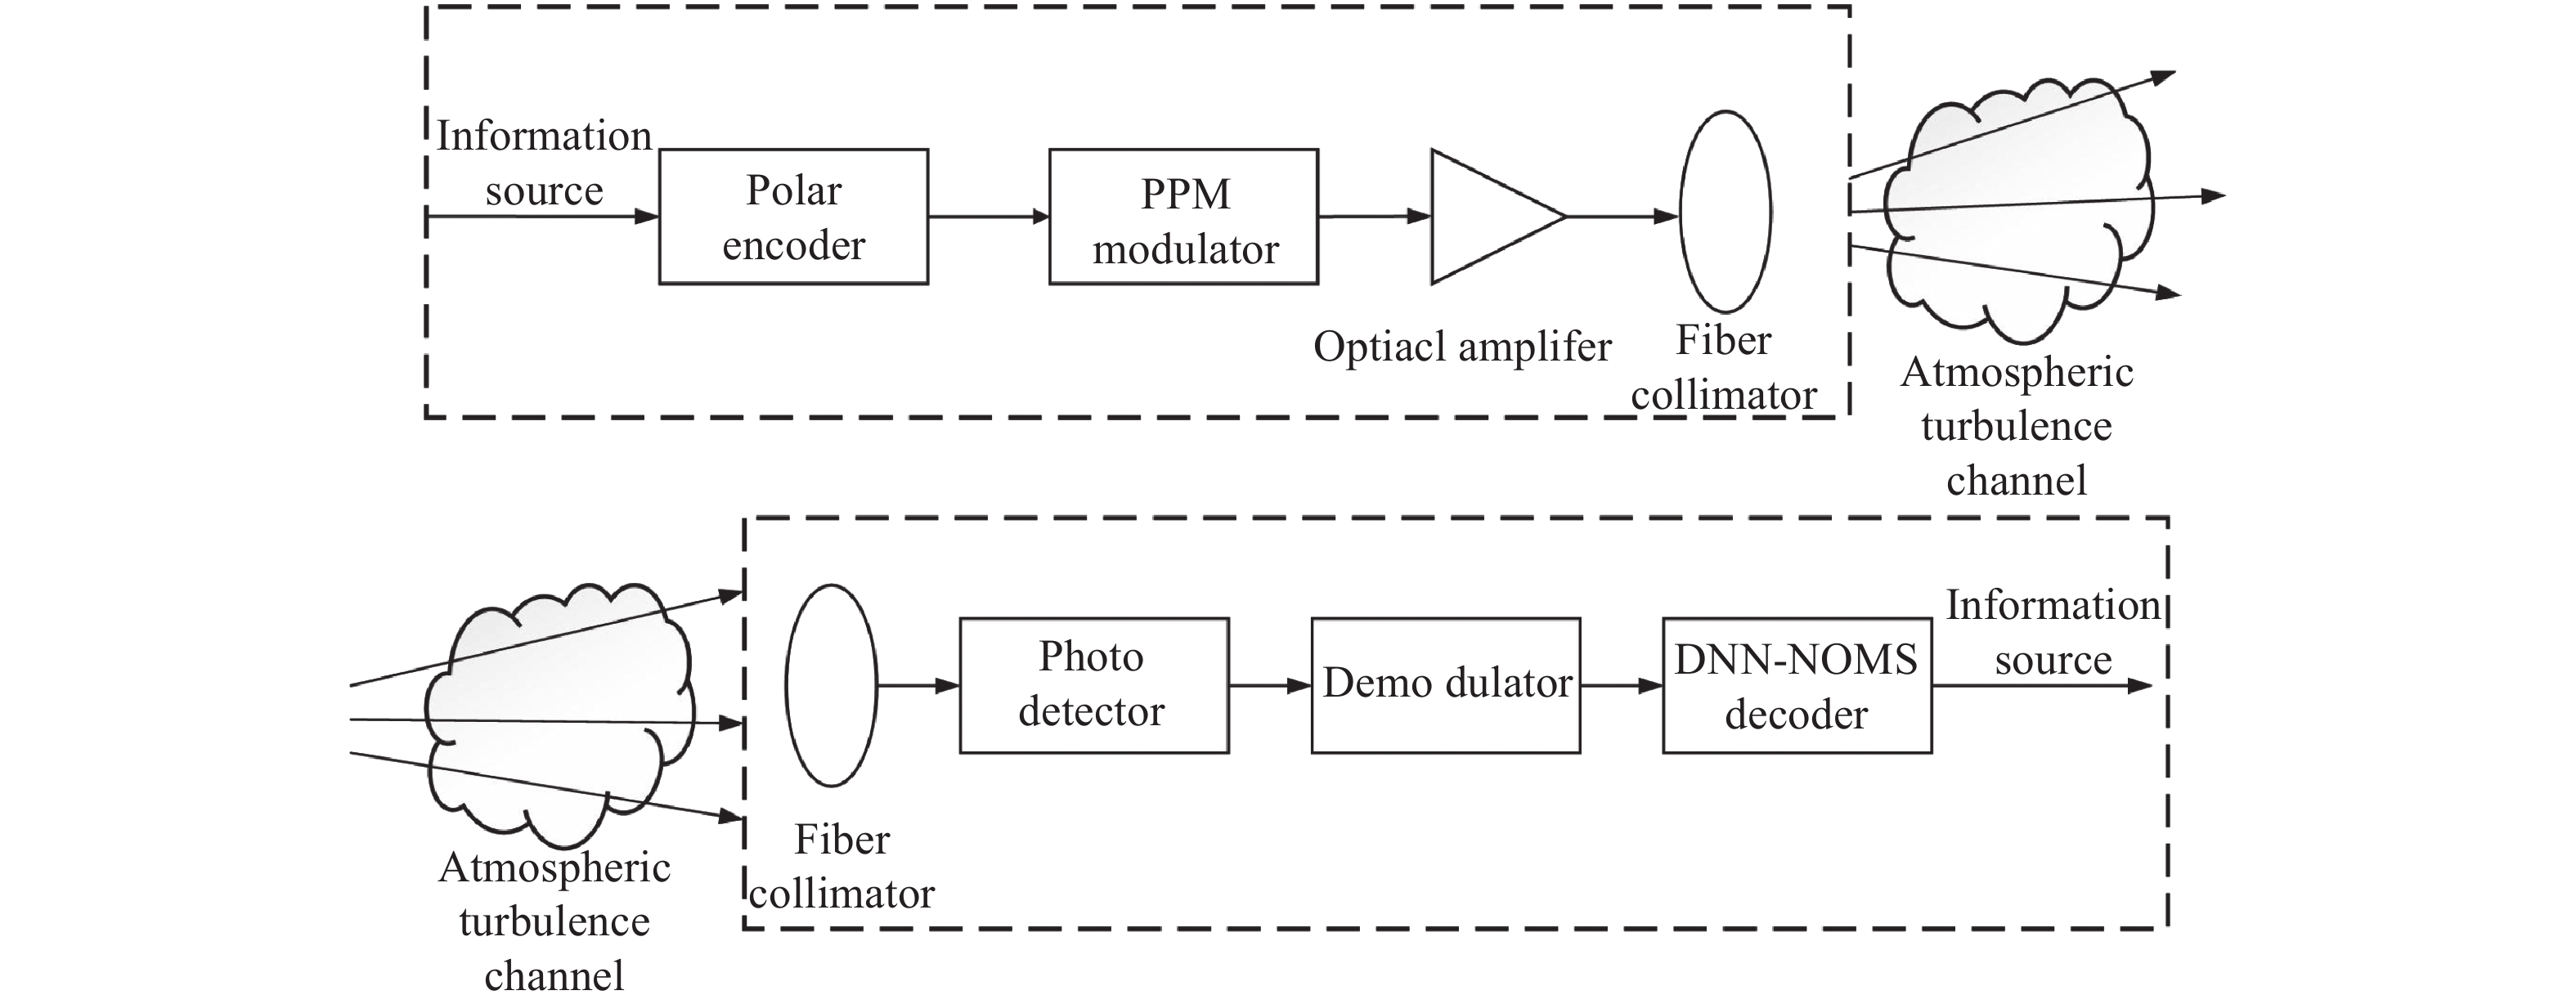 DNN neural network model assisted system model for polarization code decoding